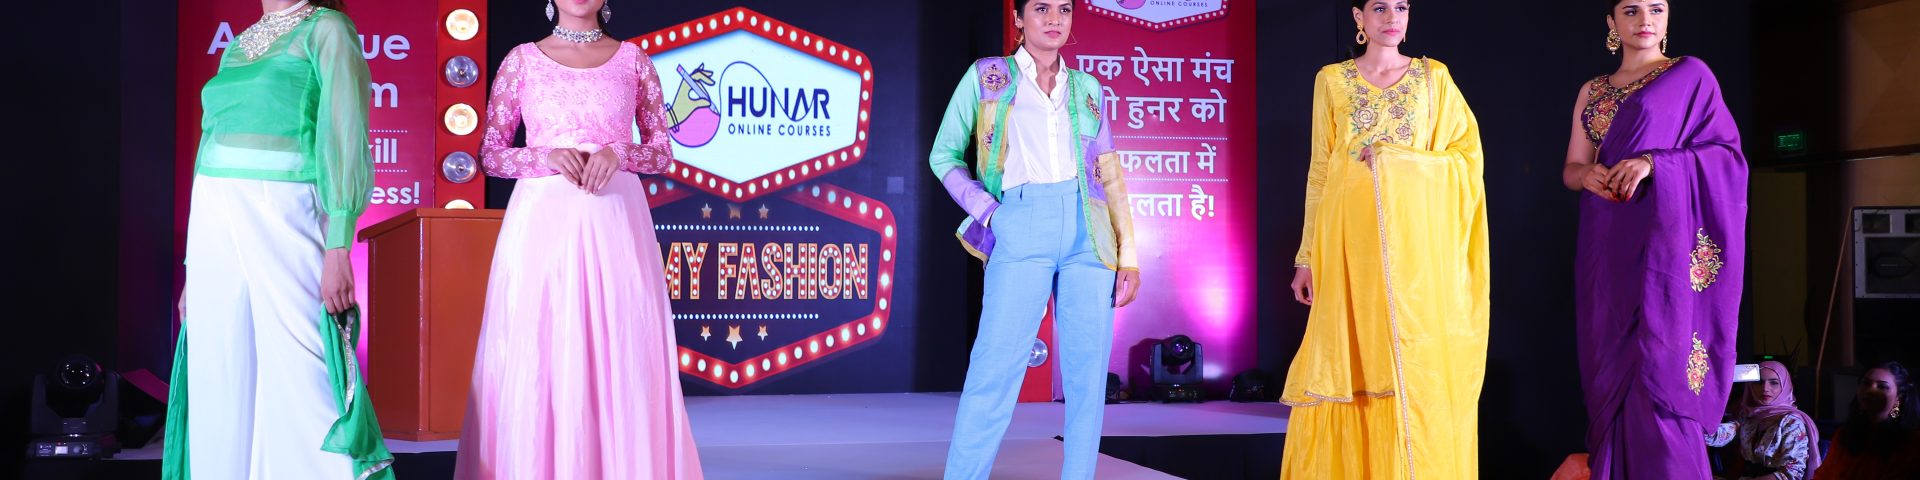 Shop For Our Brand New Hum Aapke Hain Koun Collection Only at TheHLabel